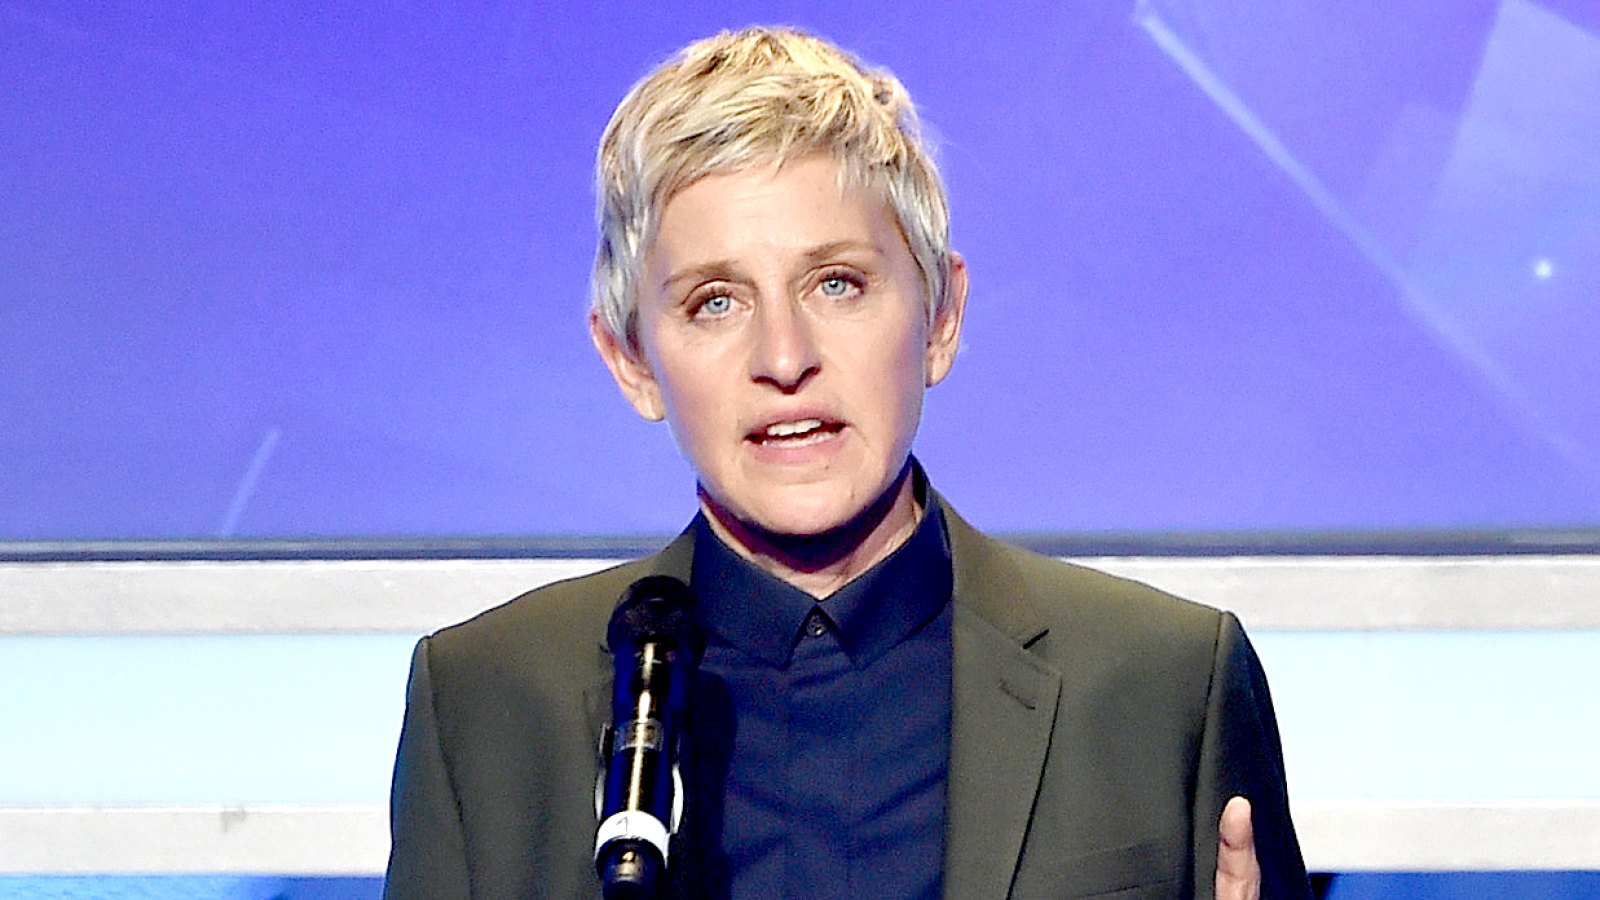 Ellen DeGeneres speaks onstage during the 26th Annual GLAAD Media Awards at The Beverly Hilton Hotel on March 21, 2015 in Beverly Hills, California.